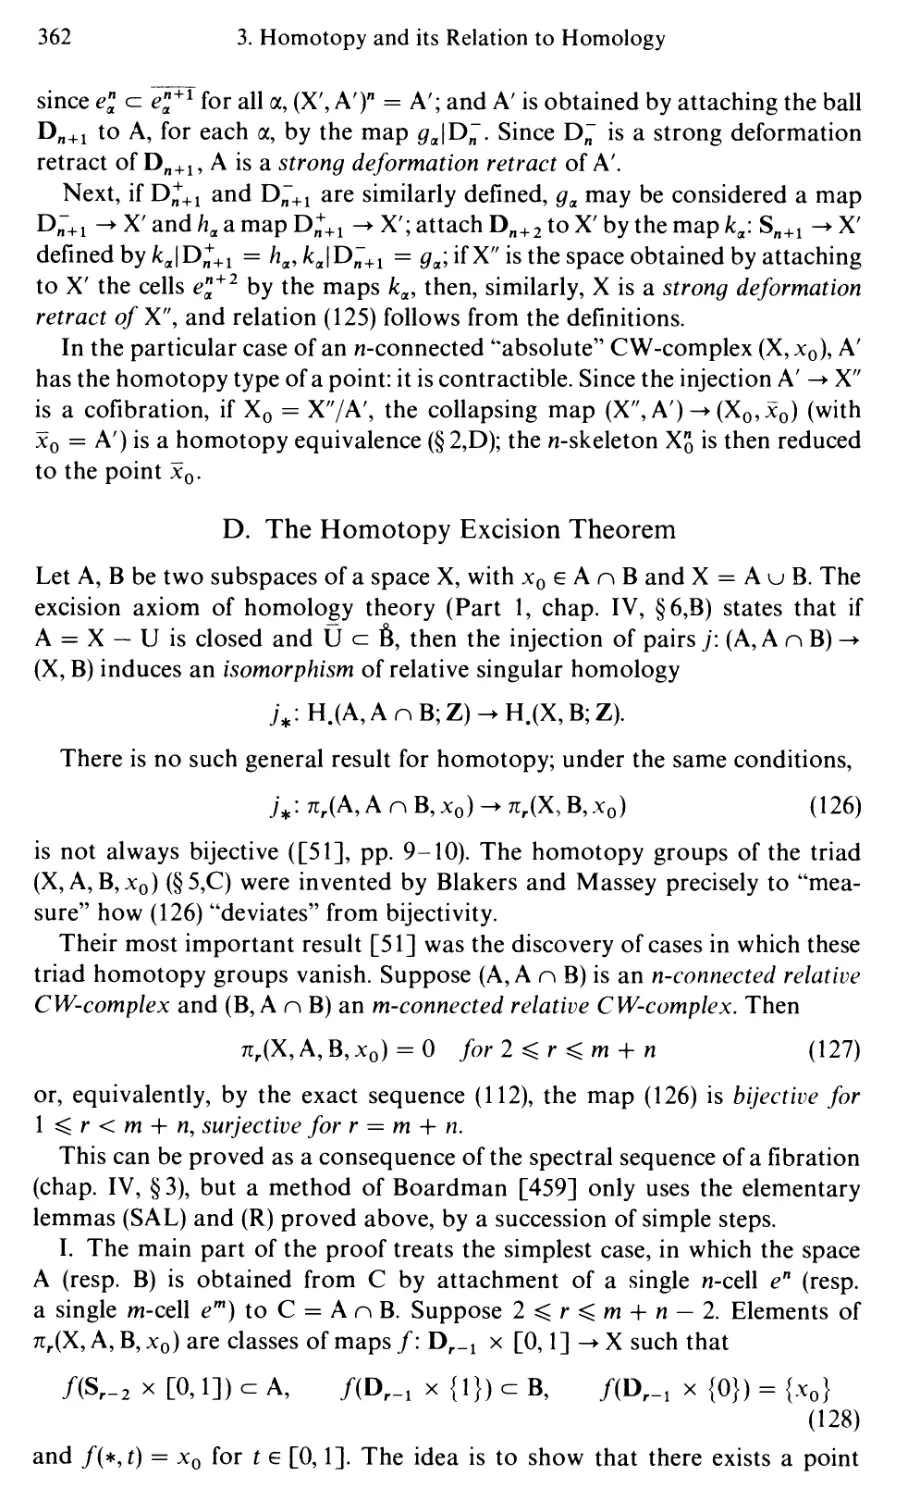 D. The Homotopy Excision Theorem